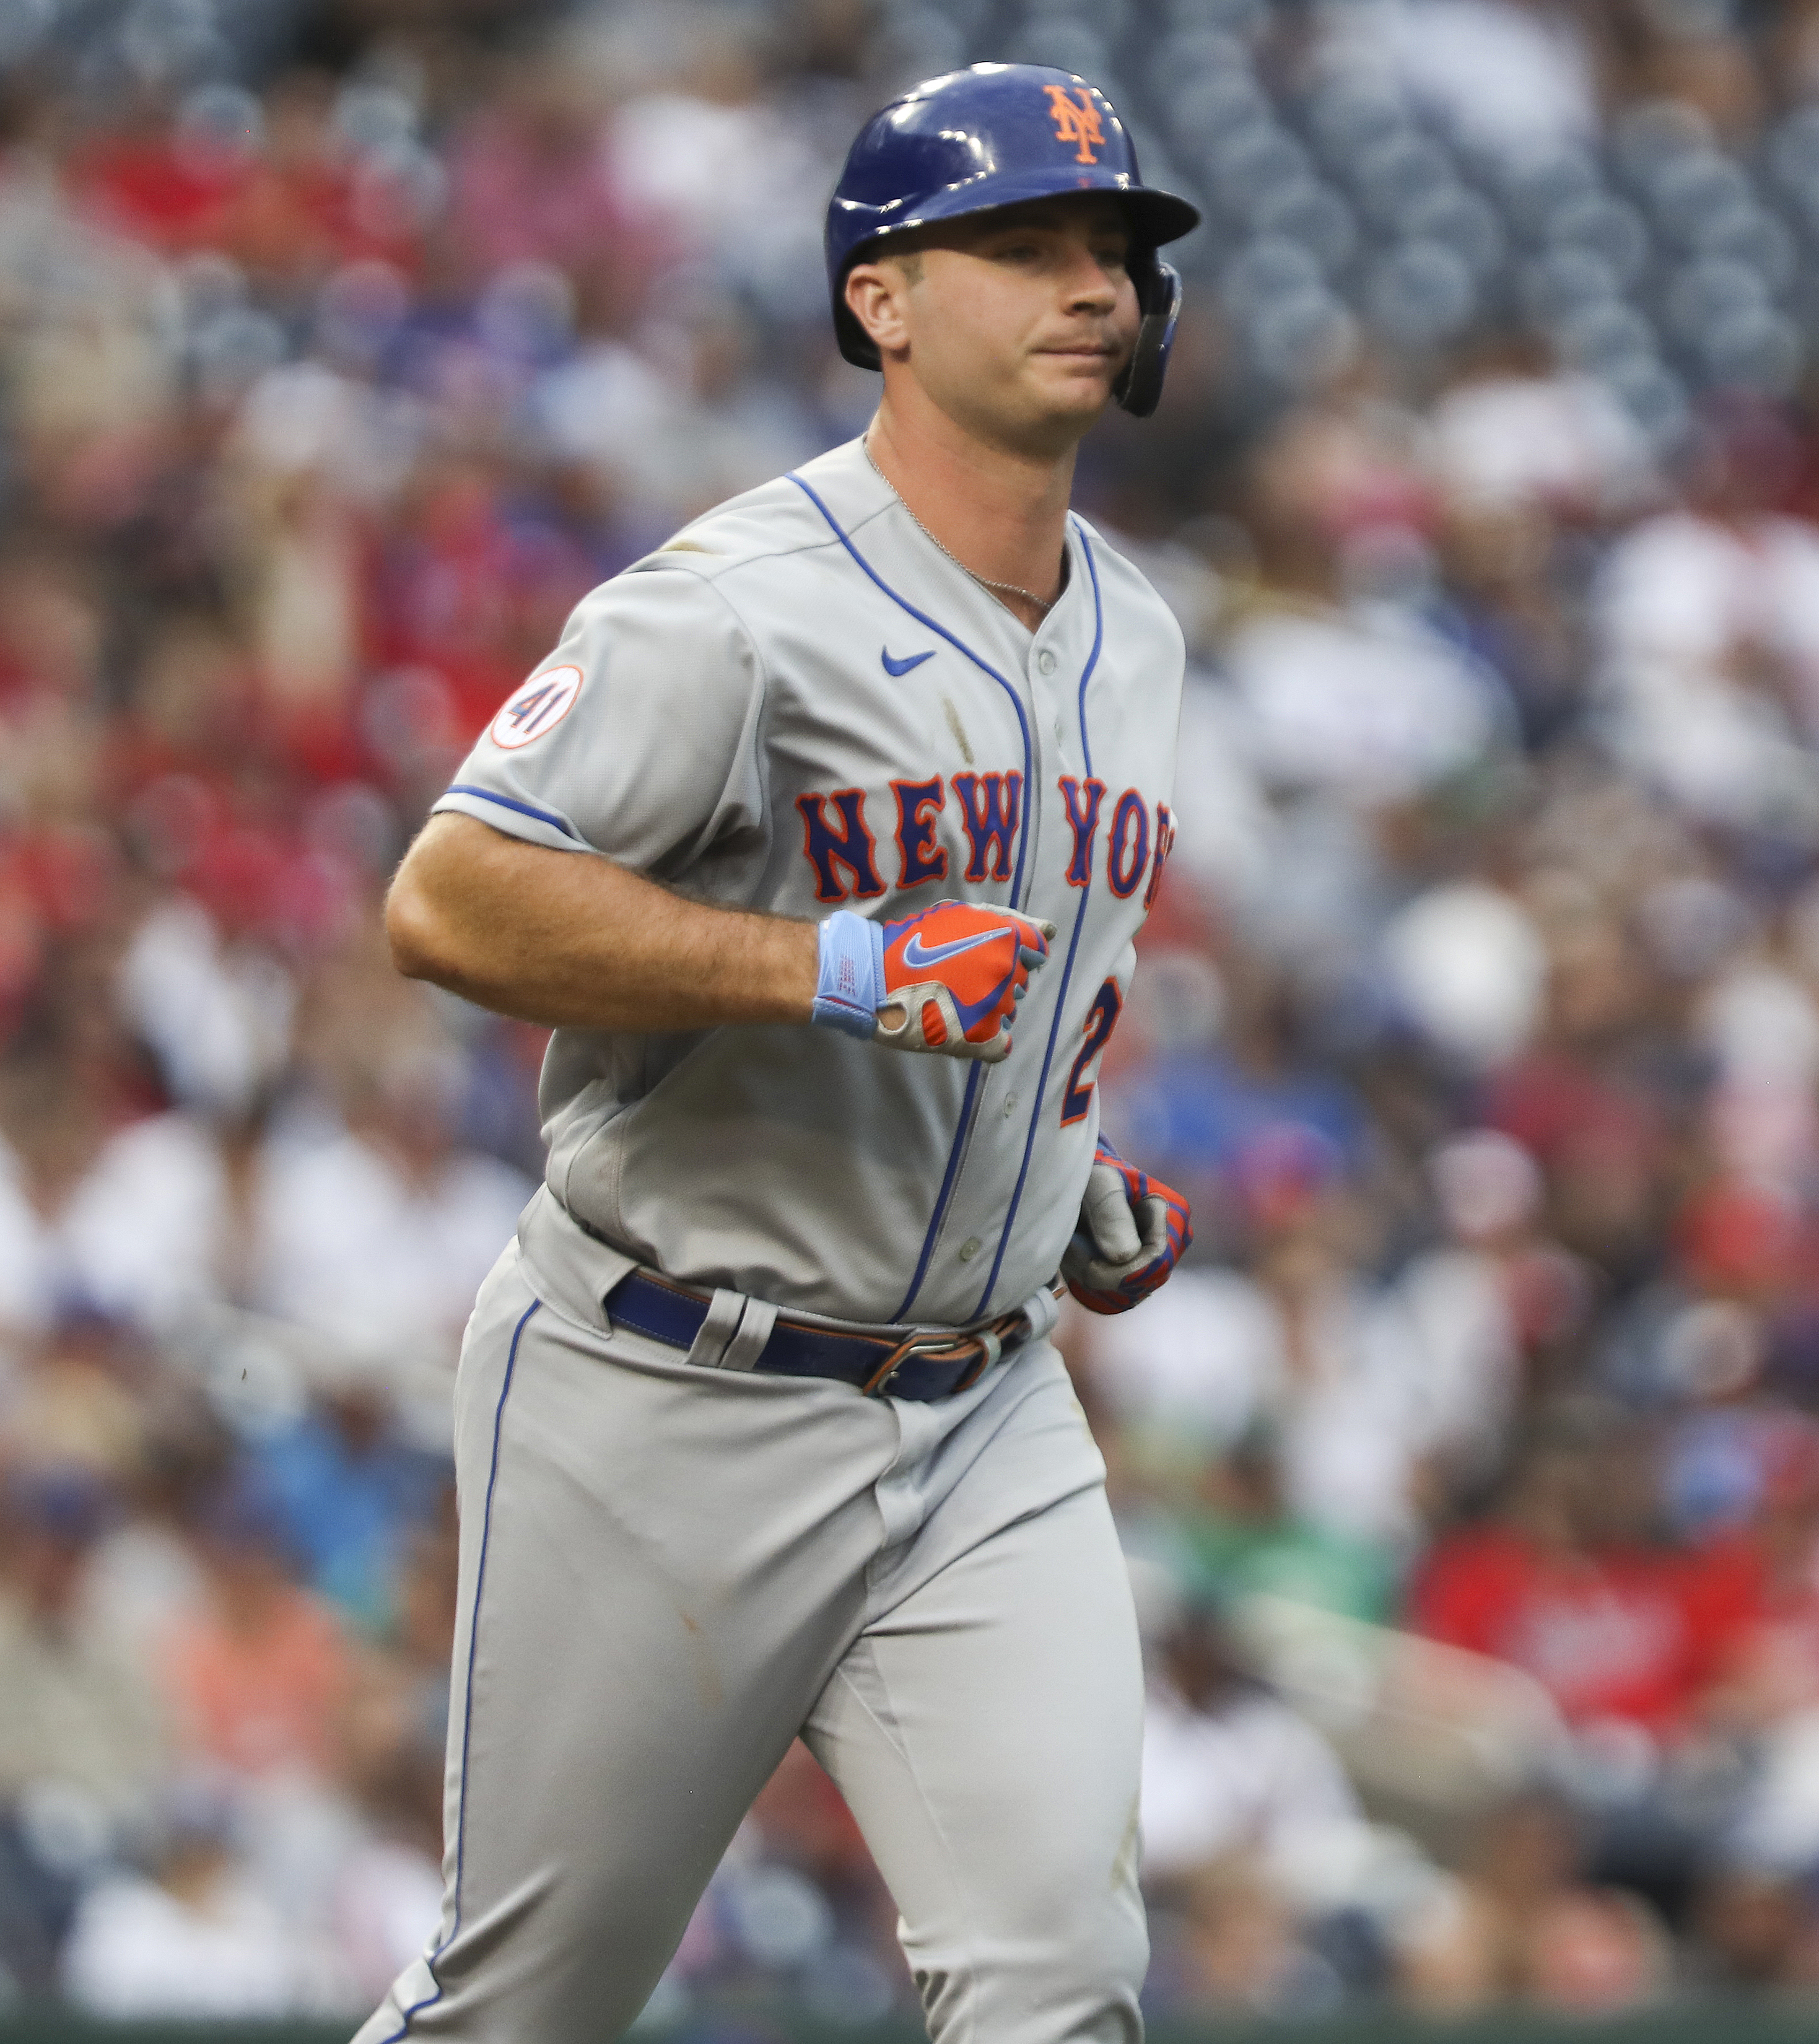 Mets' Pete Alonso's new offseason routine: Running two miles 'as